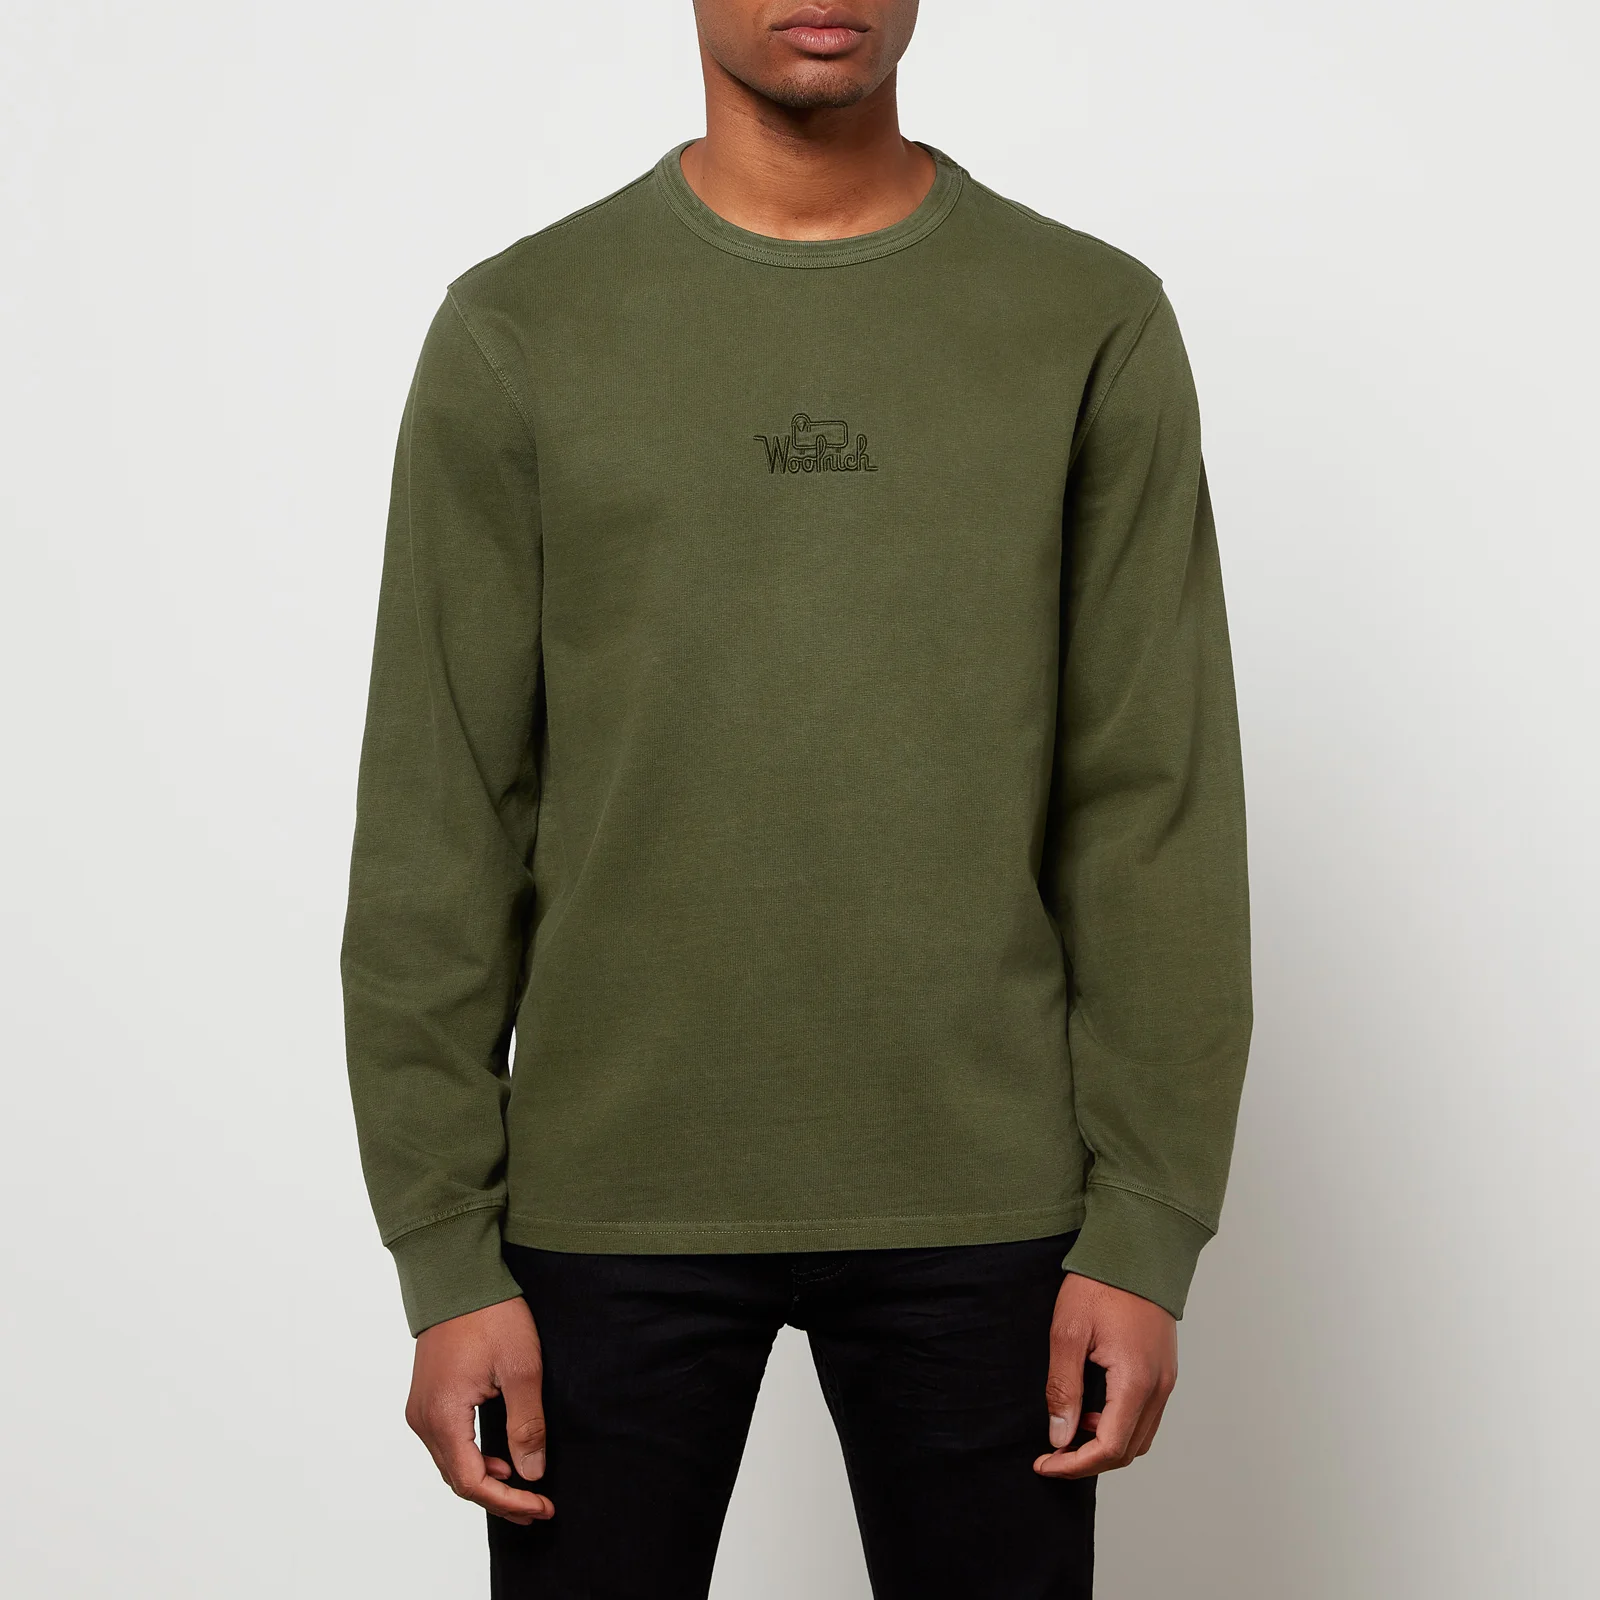 Woolrich Men's Faded Long Sleeve Top - Ivy Green Image 1